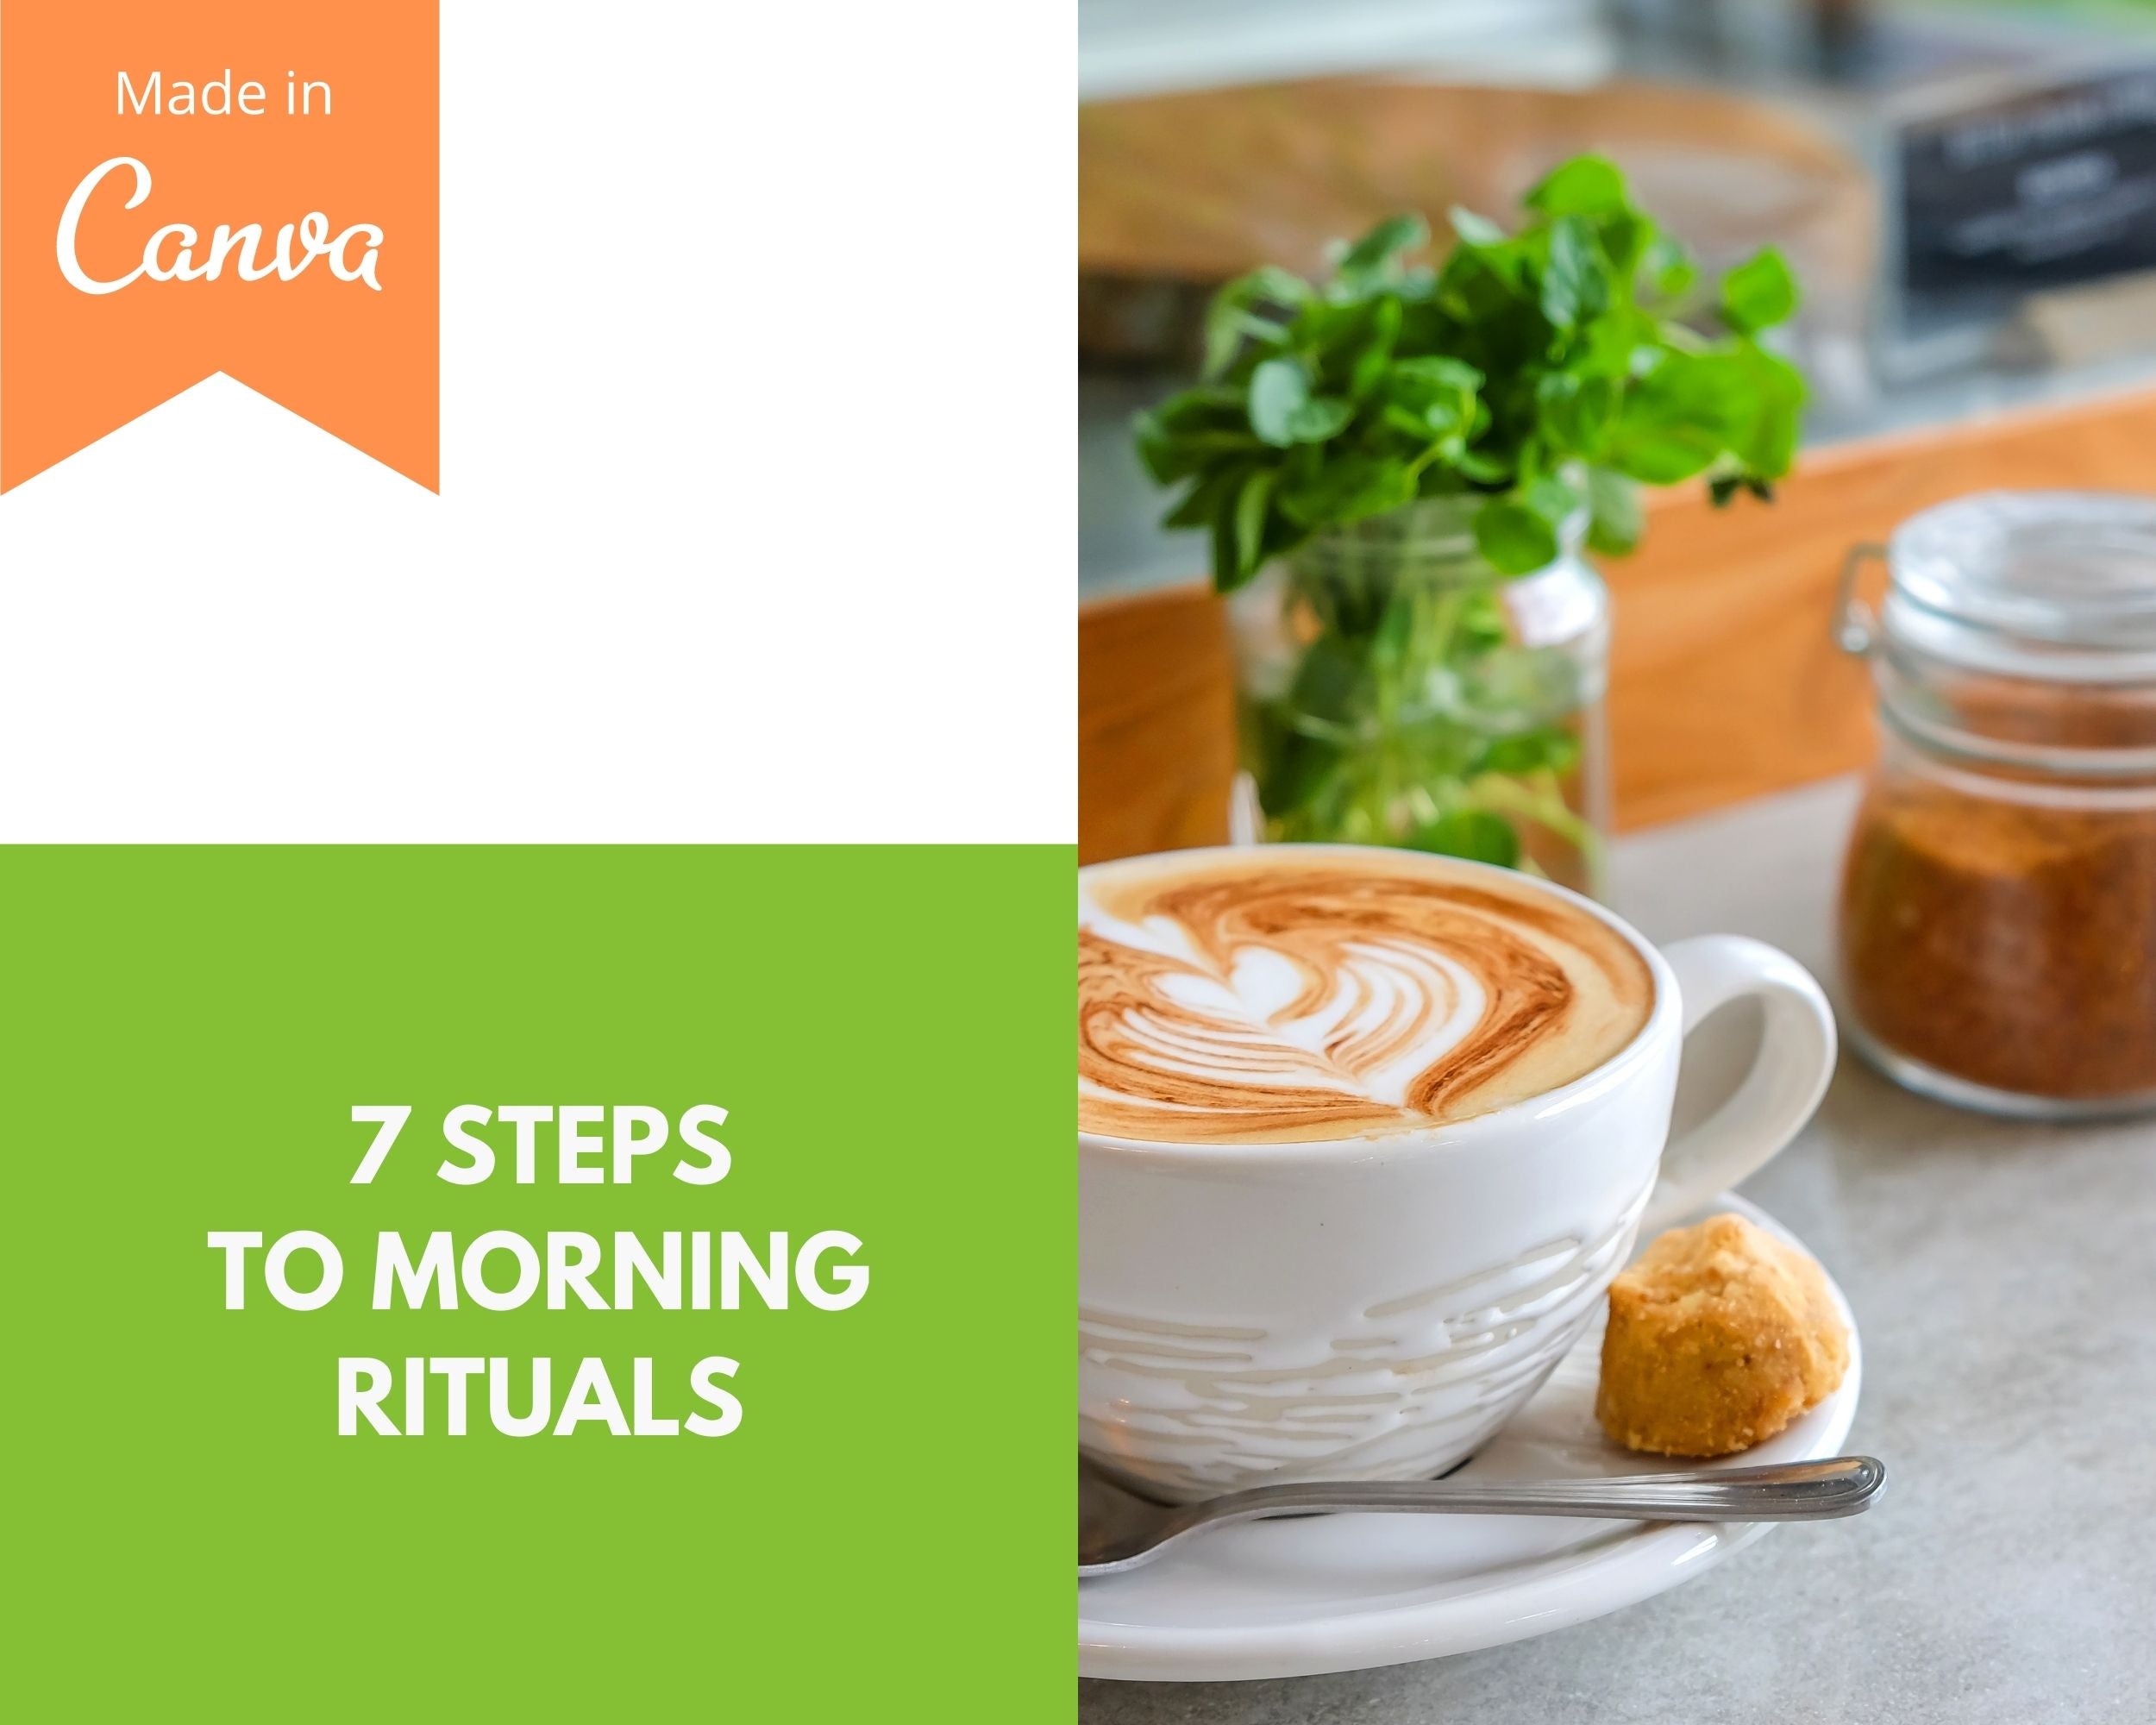 Morning Rituals 7 Emails | Email eCourse Template